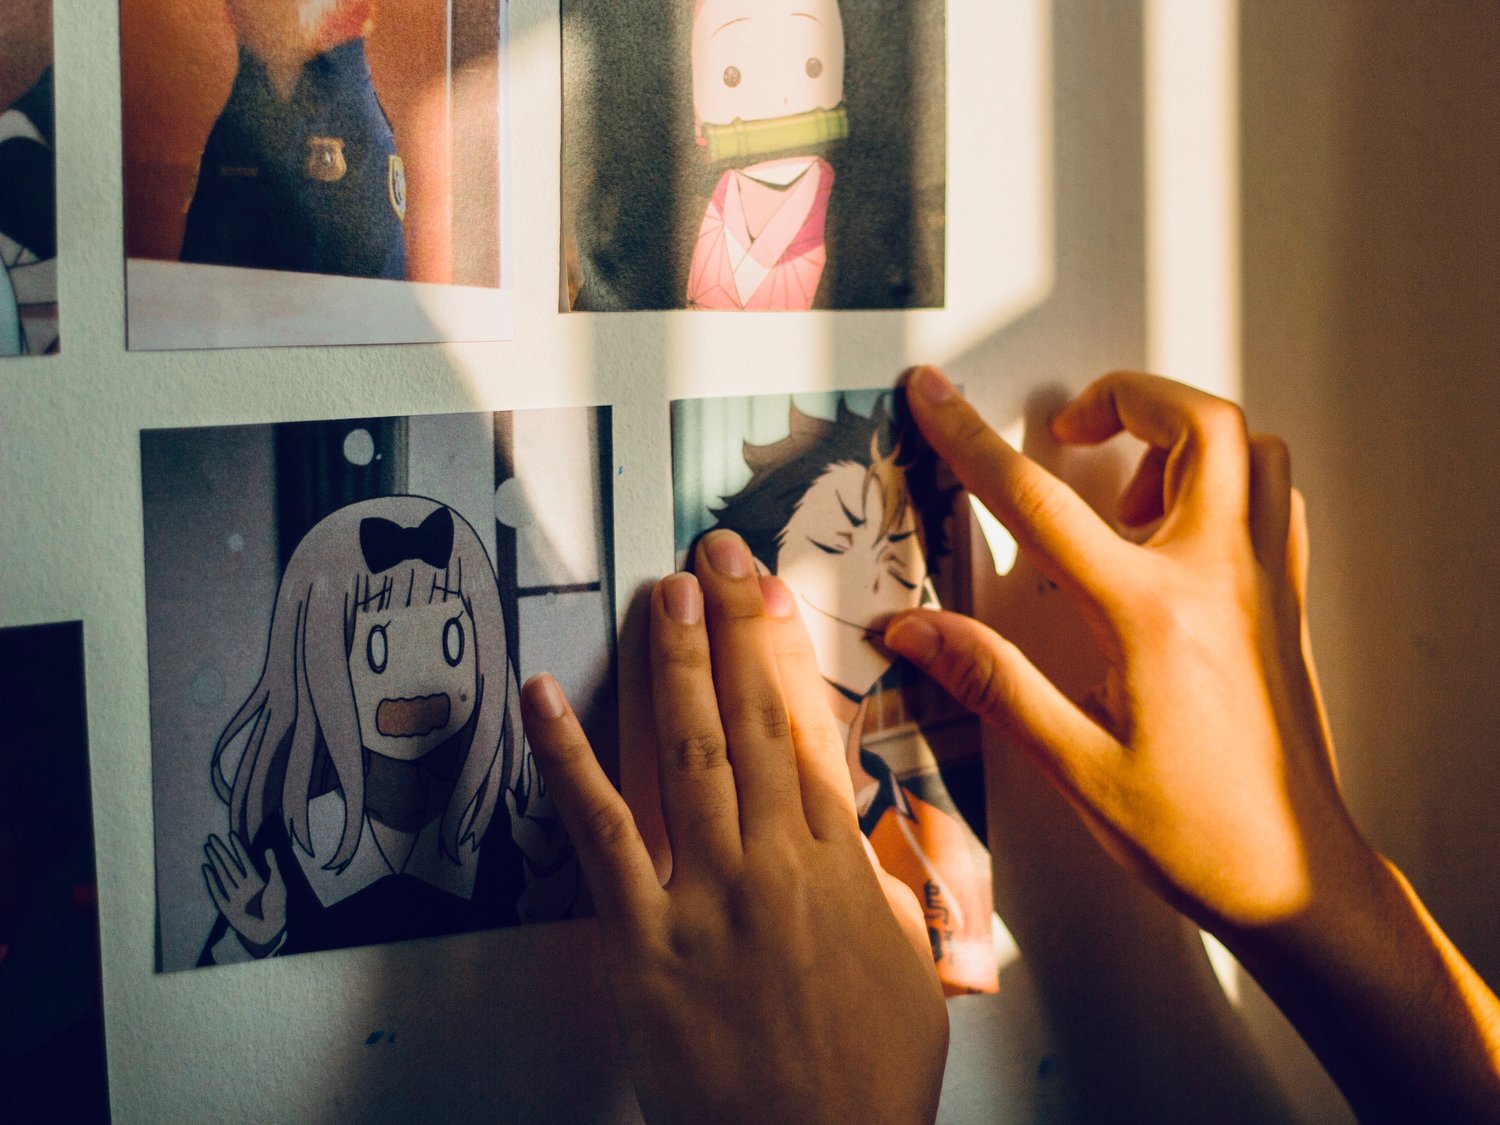 Someone's hands hanging anime artwork on a wall